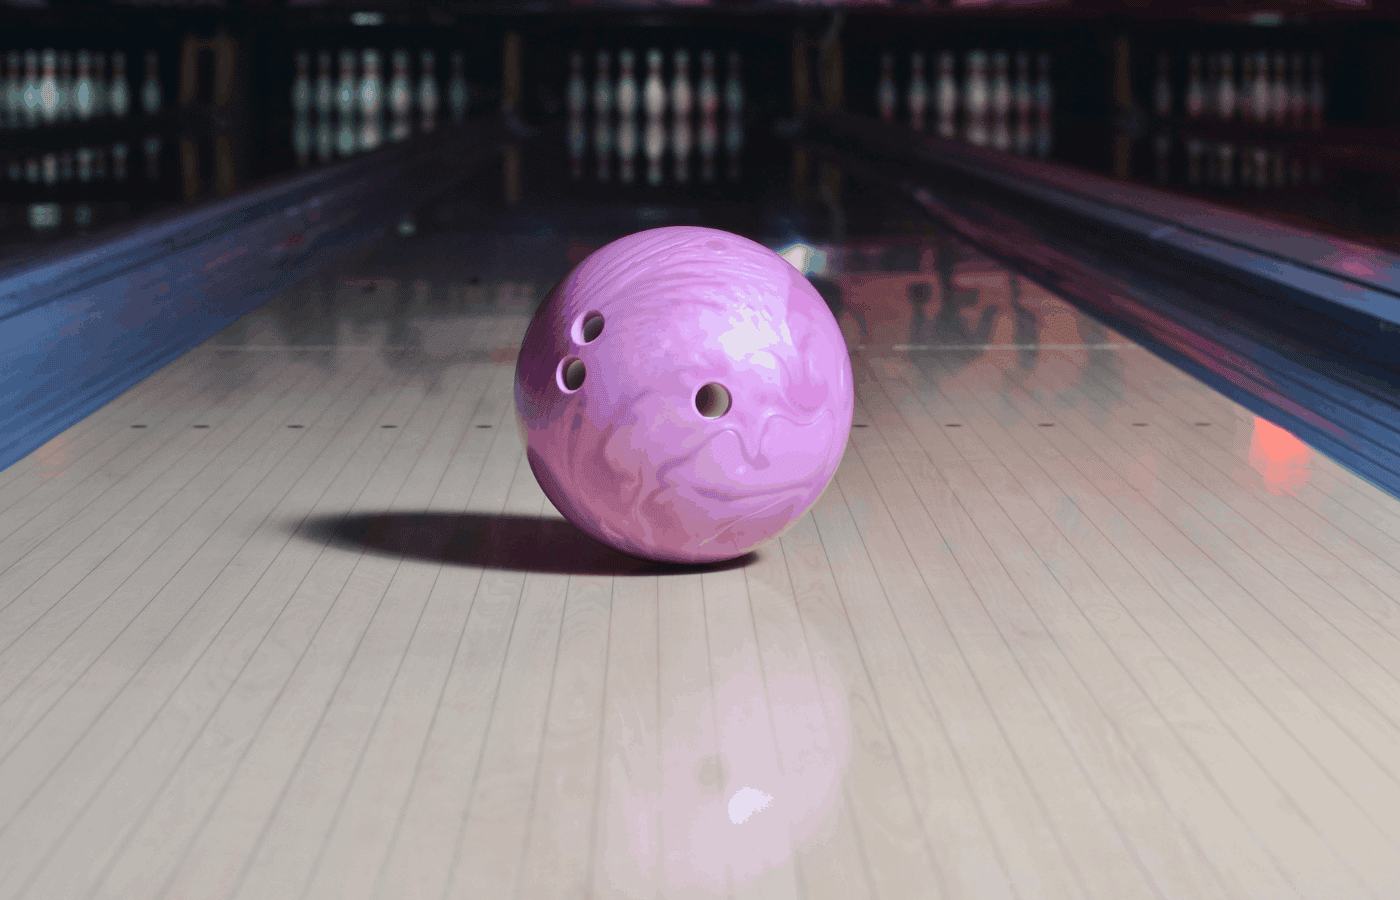 What Household Items Can You Use to Clean a Bowling Ball